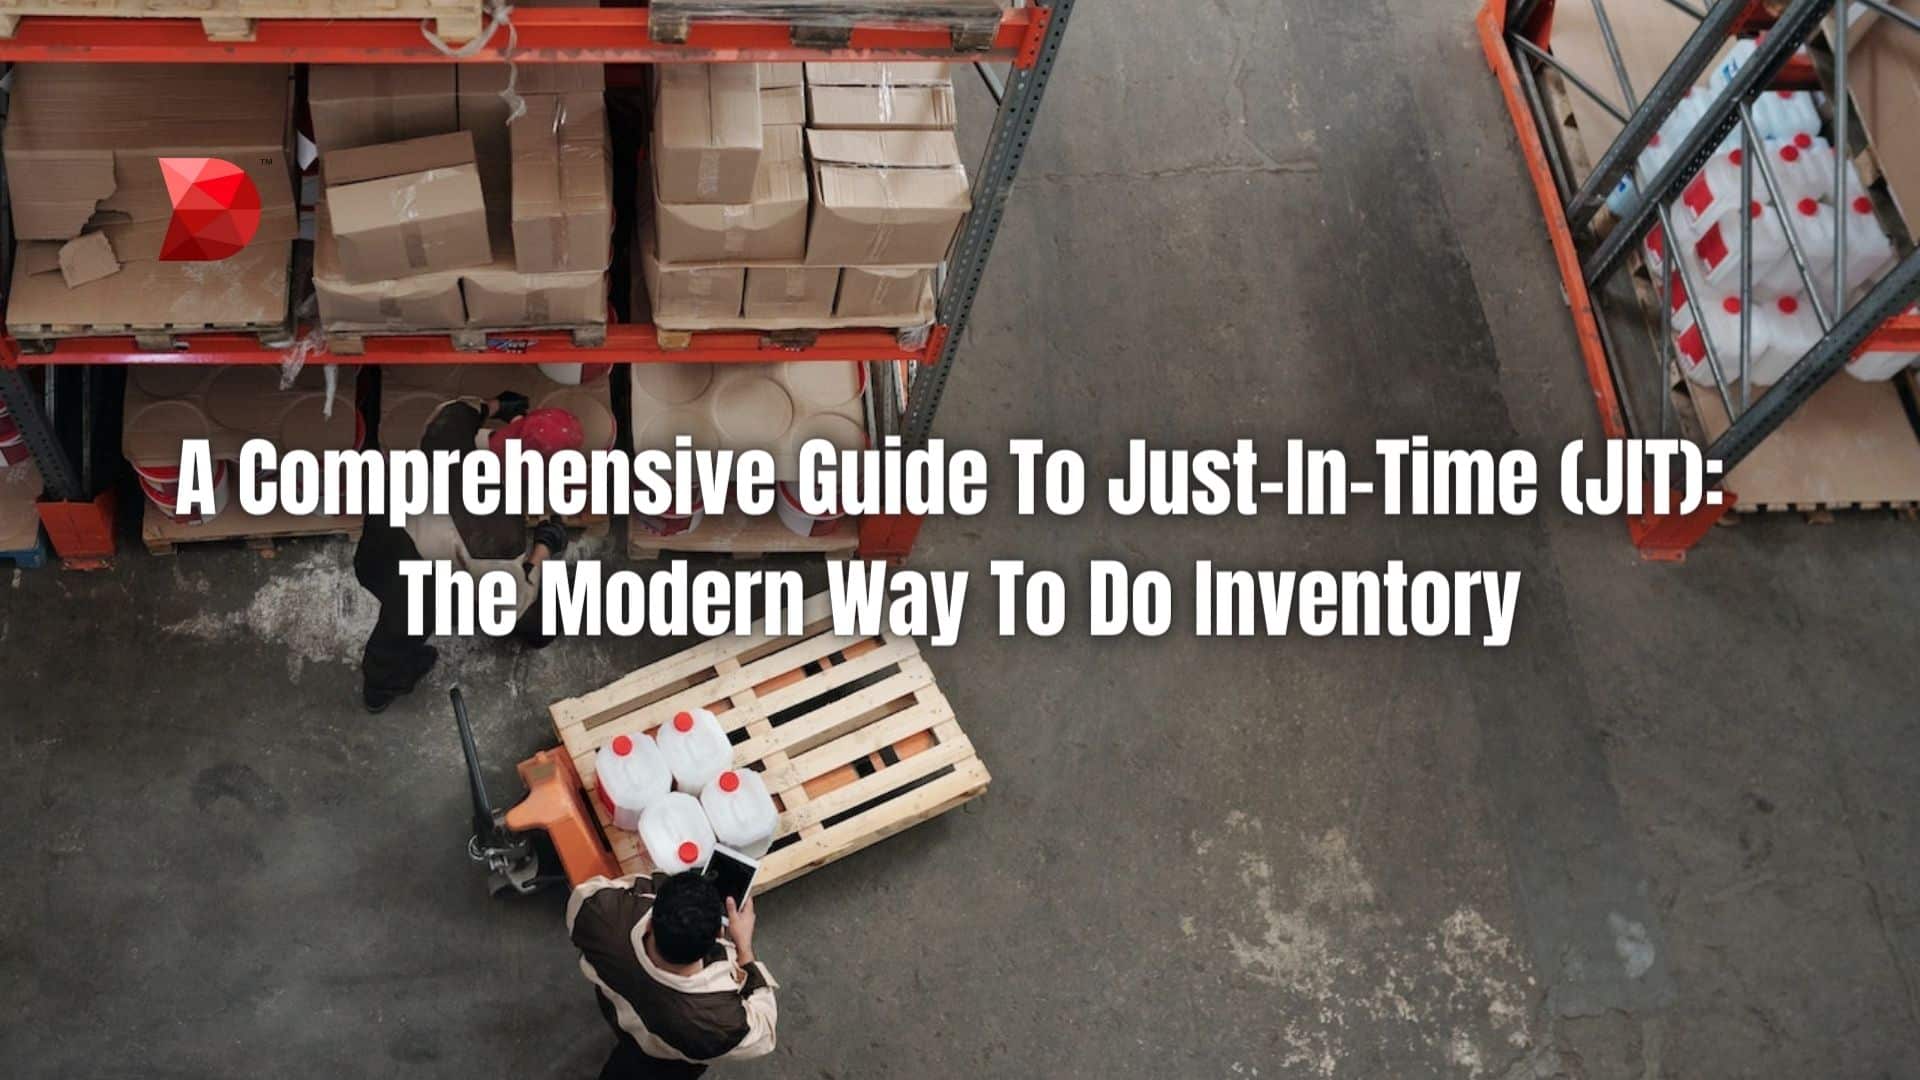 A Comprehensive Guide To Just-In-Time (JIT) The Modern Way To Do Inventory